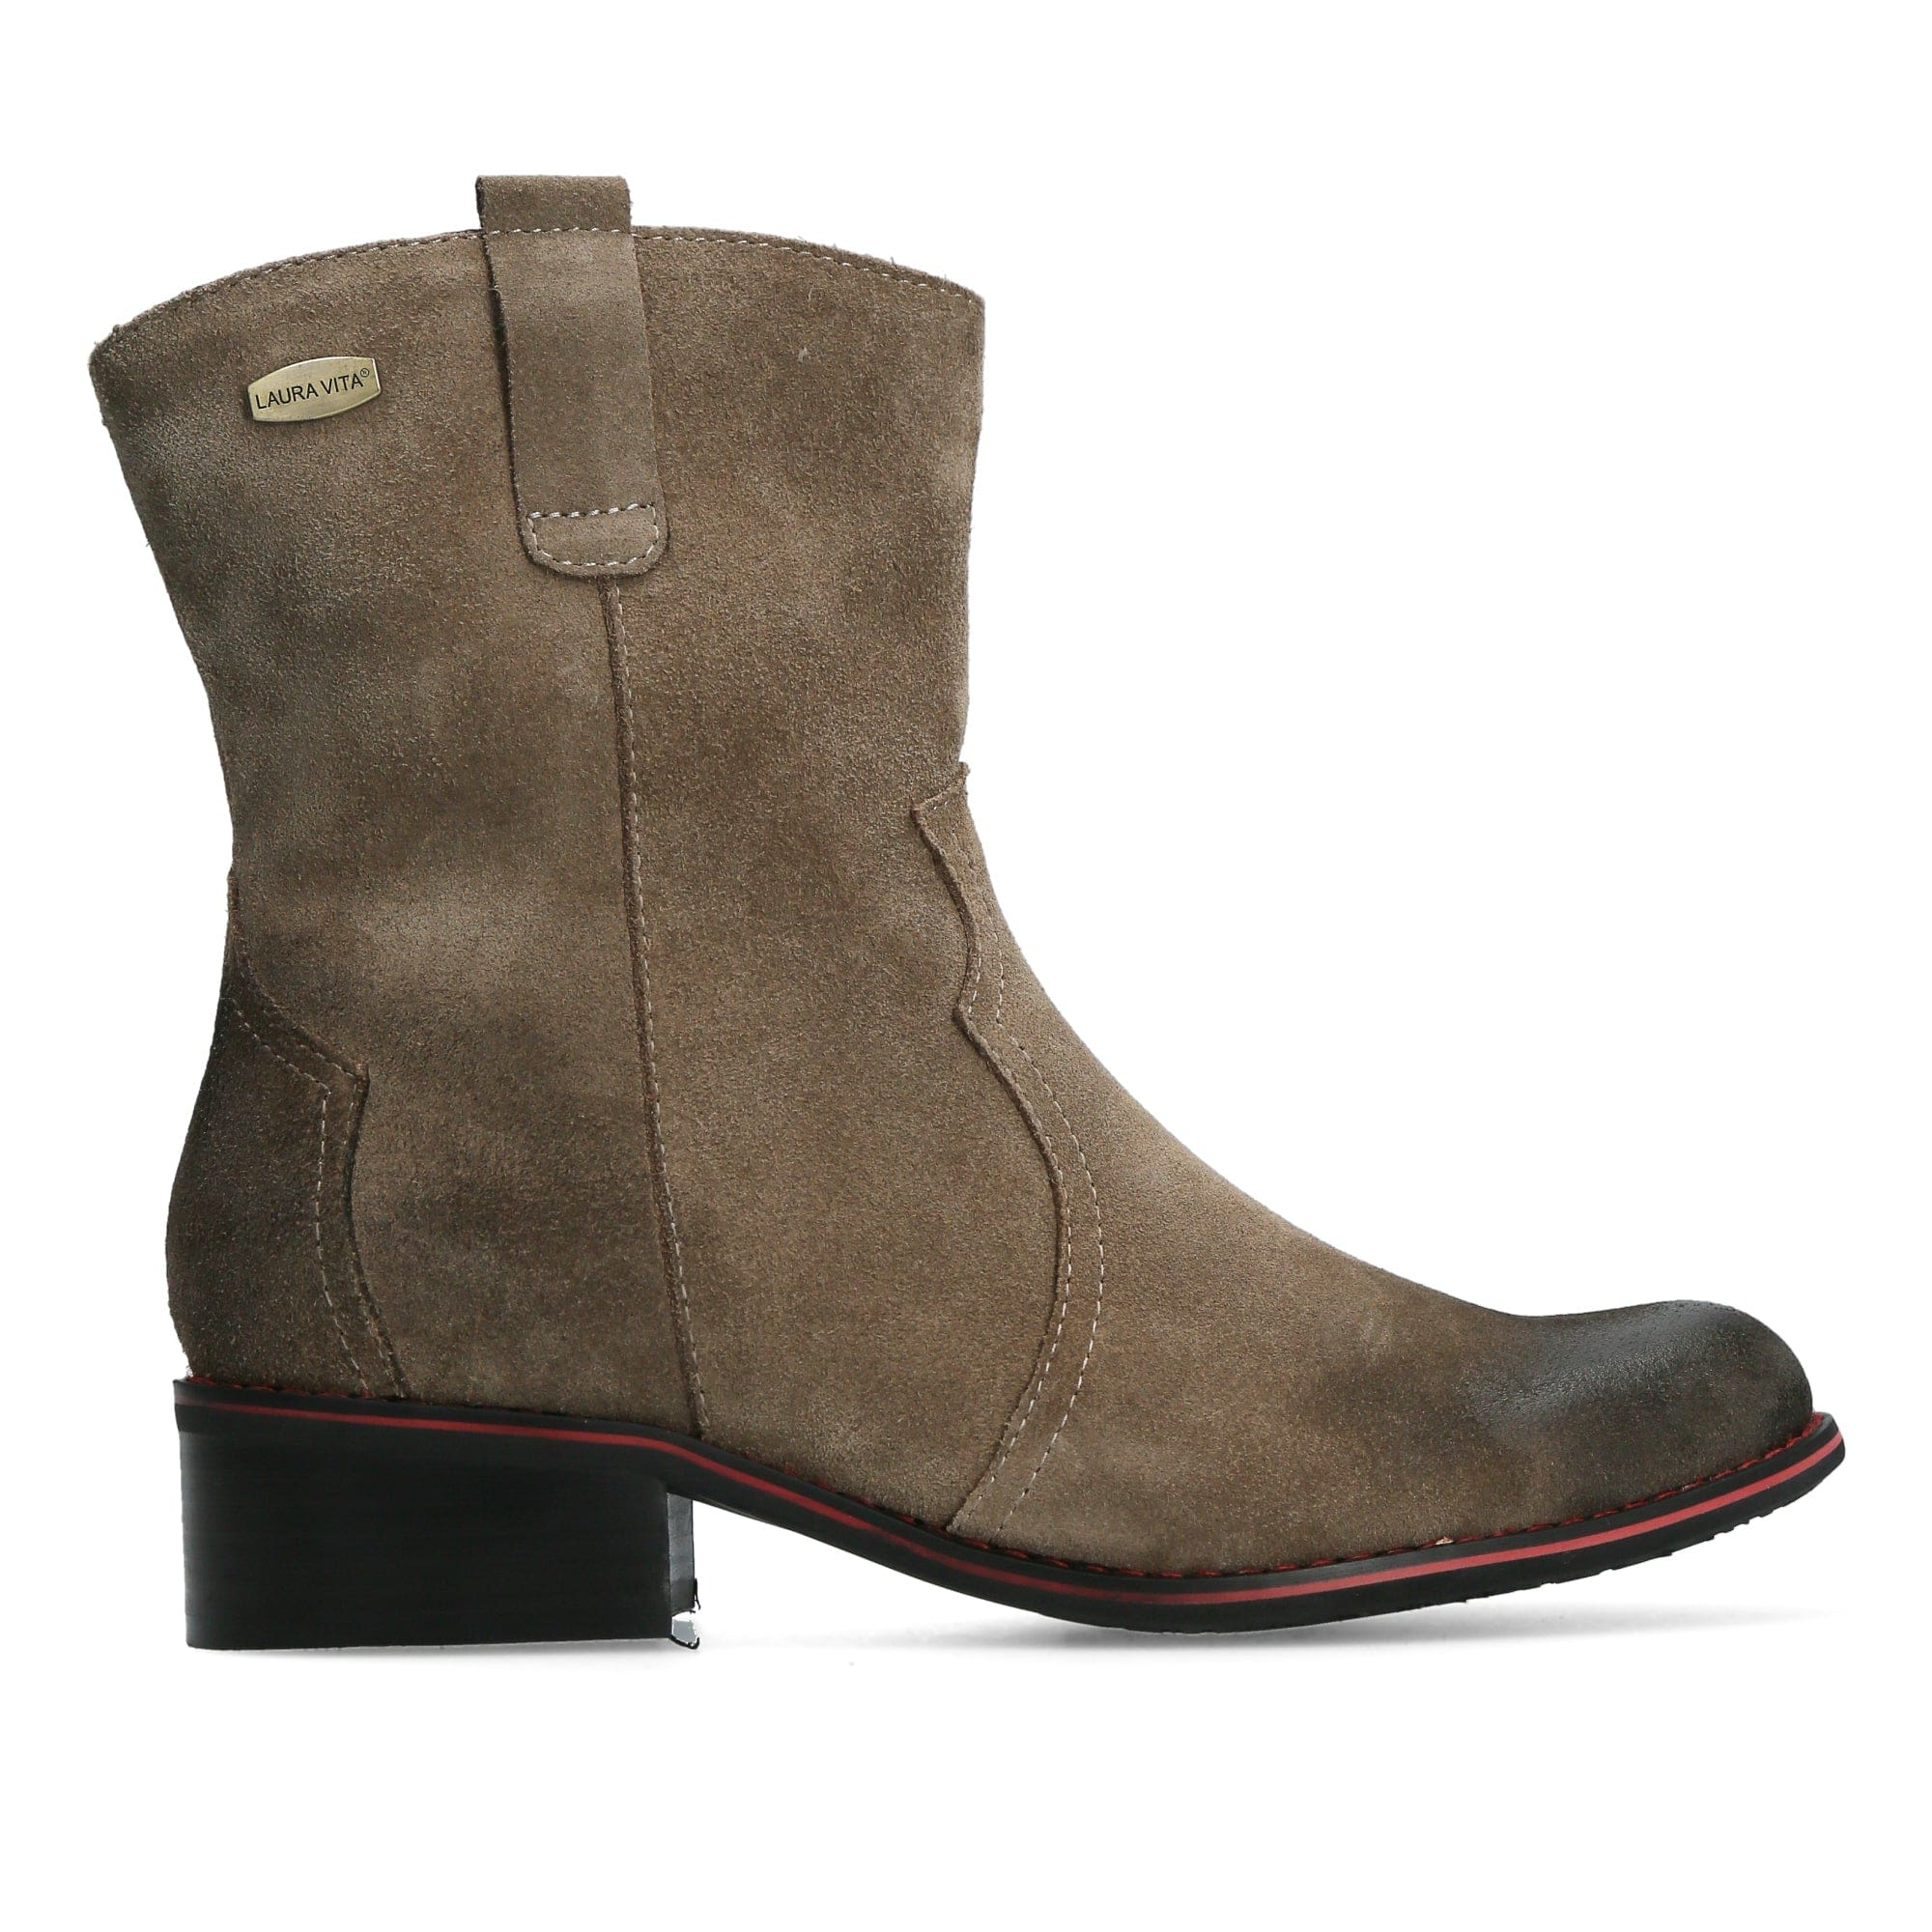 ALICE 83 - 35 / Taupe - Boots